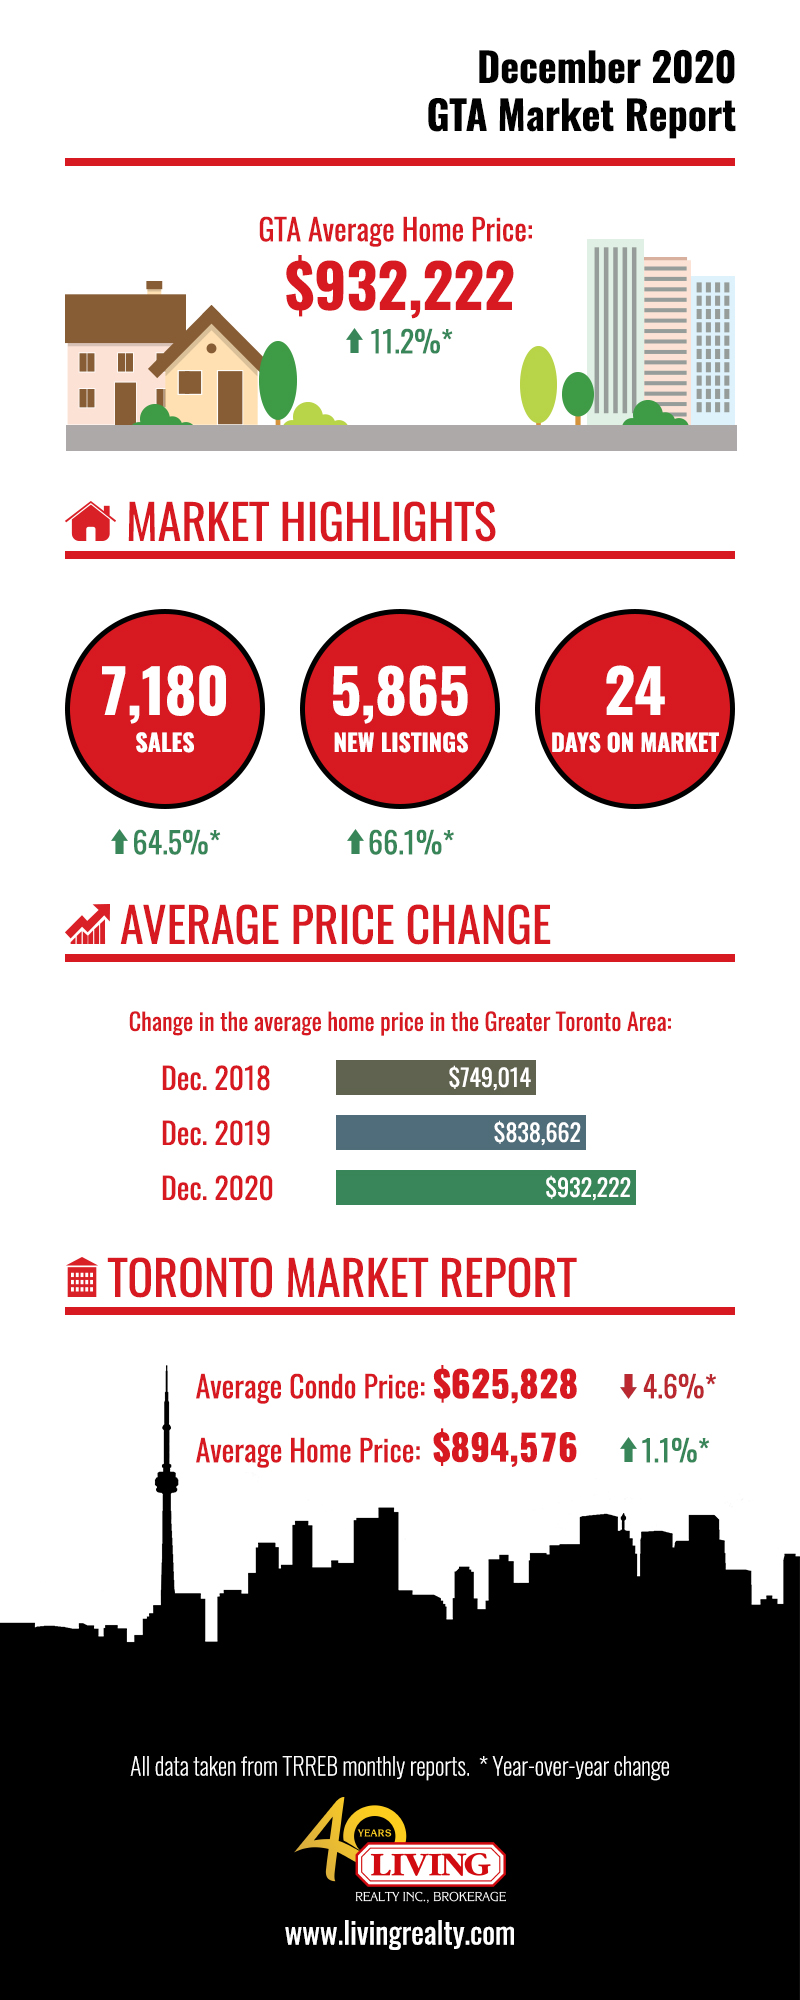 December 2020 housing market report for Toronto and GTA